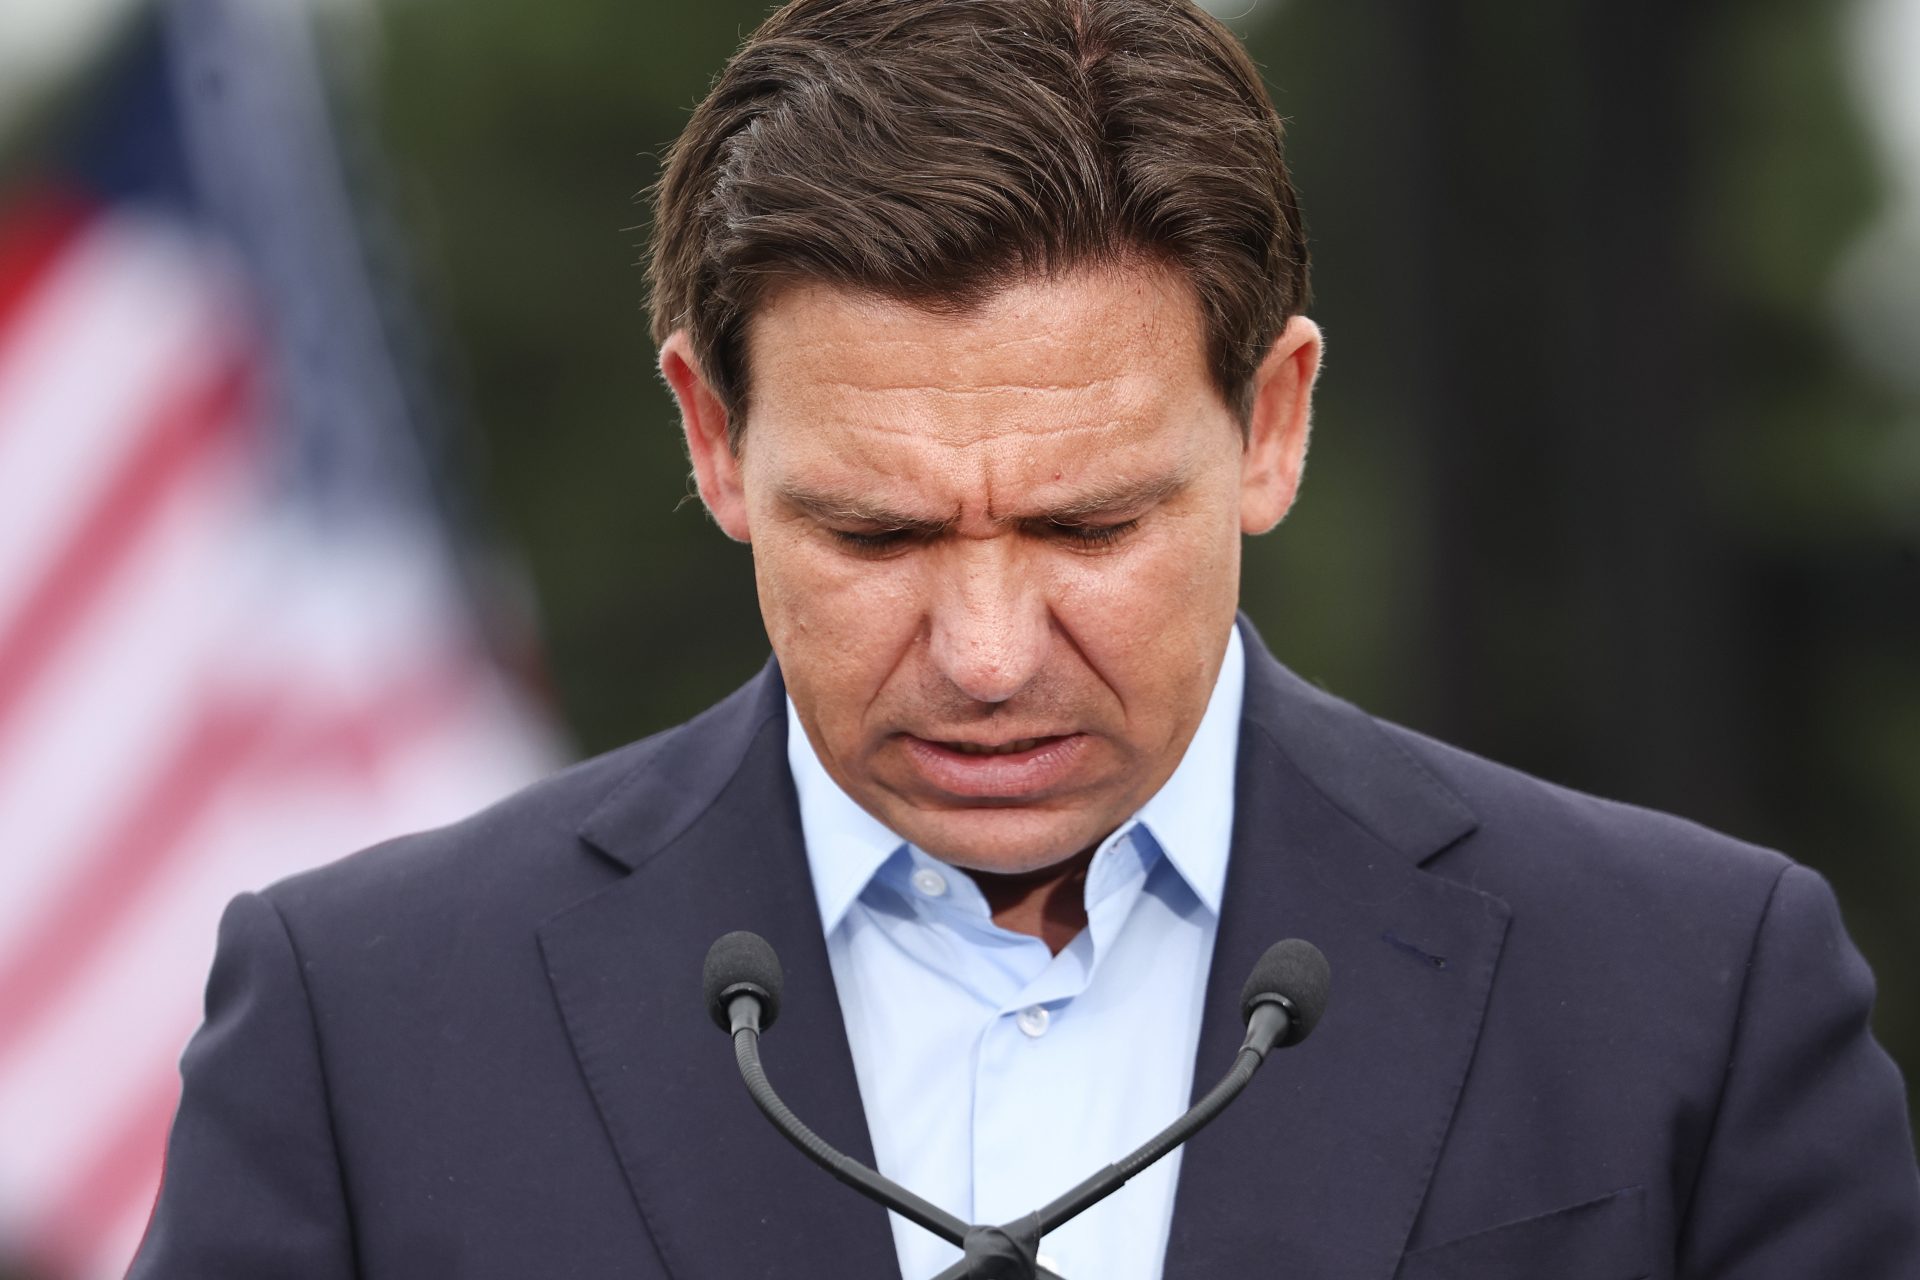 Republicans in Florida call for DeSantis to end his 2024 run and focus on the state